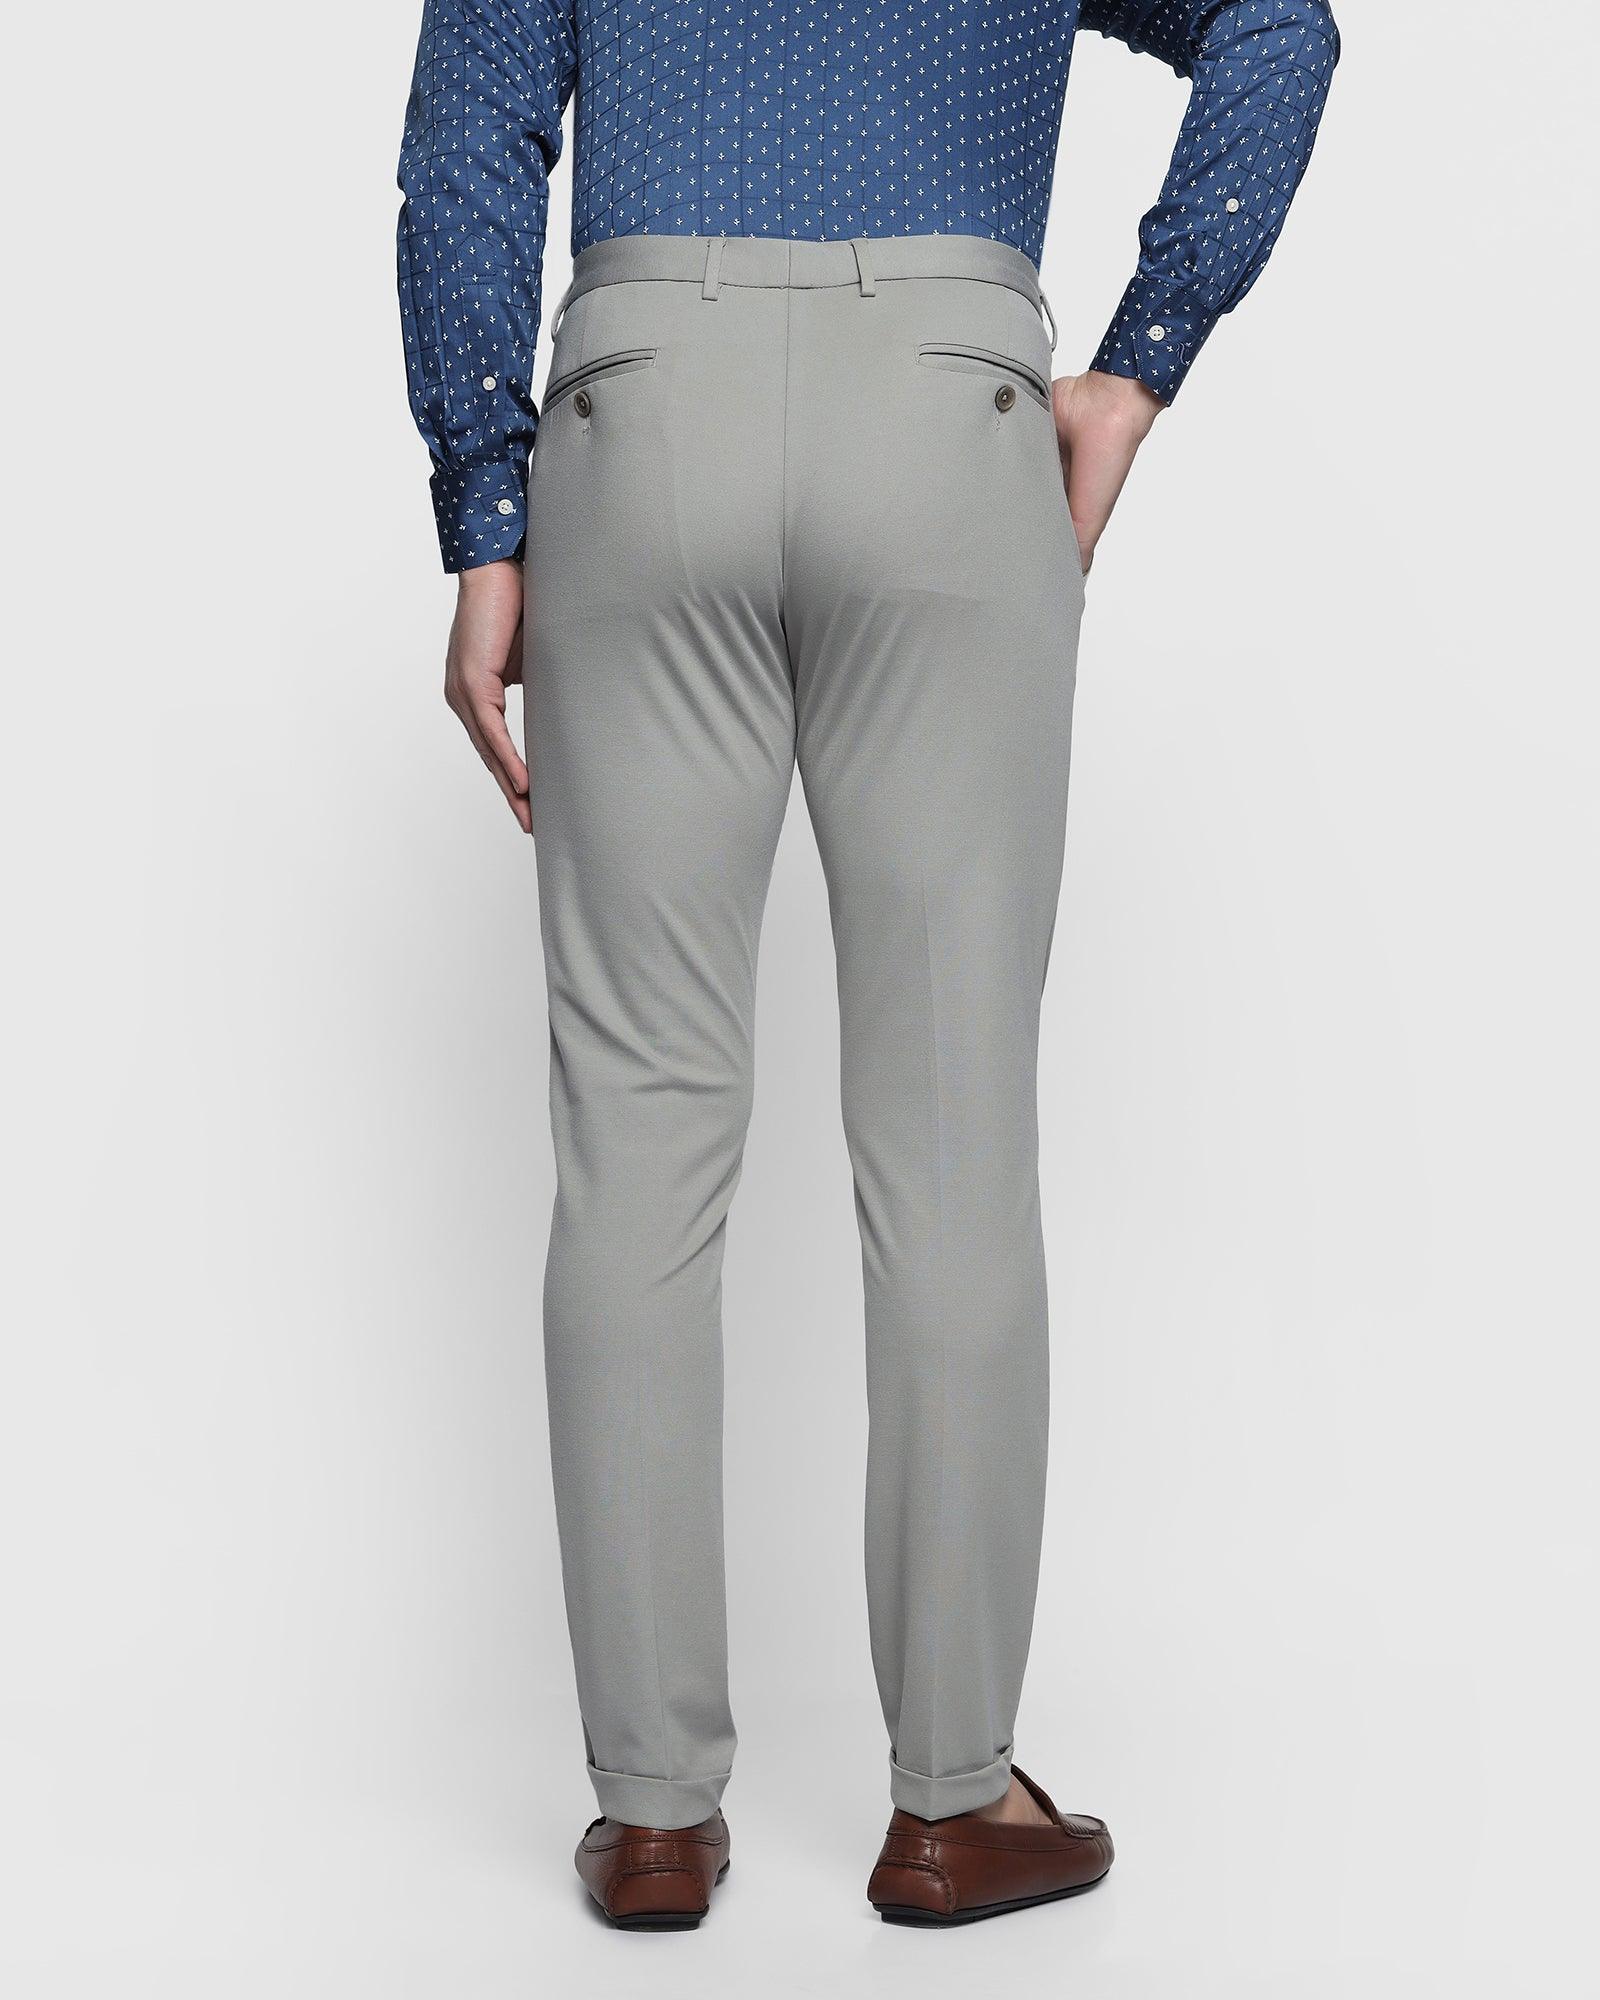 Buy Light Grey Formal Trousers For Male Online  Best Prices in India   Uniform Bucket  UNIFORM BUCKET